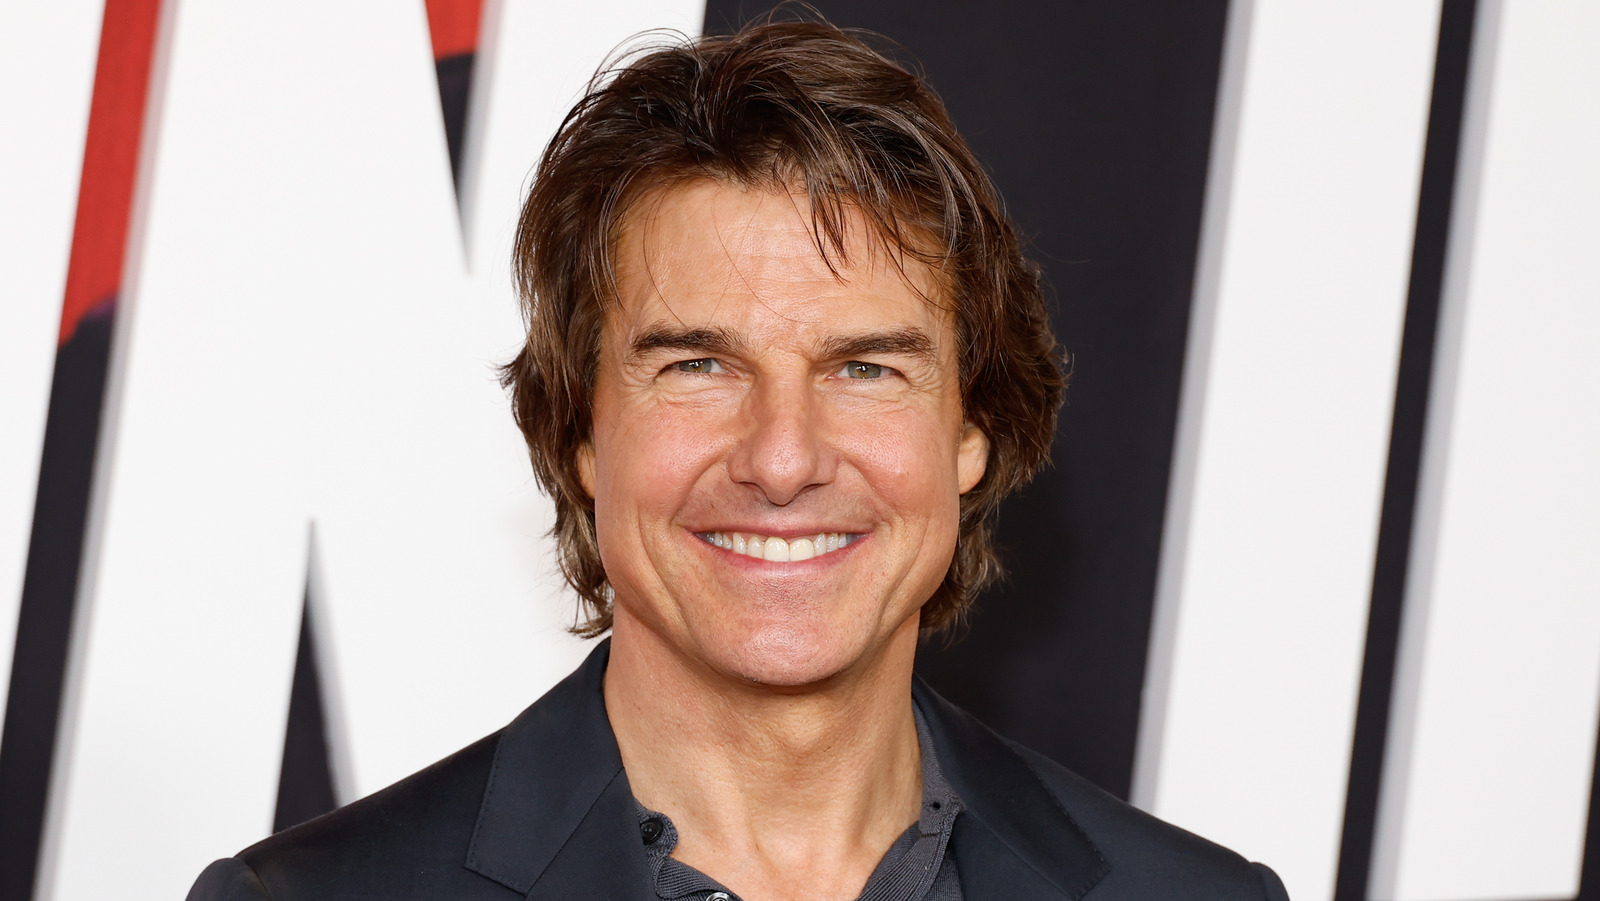 Tom Cruise Reportedly Skipped The 2023 Oscars To Avoid Seeing His Ex